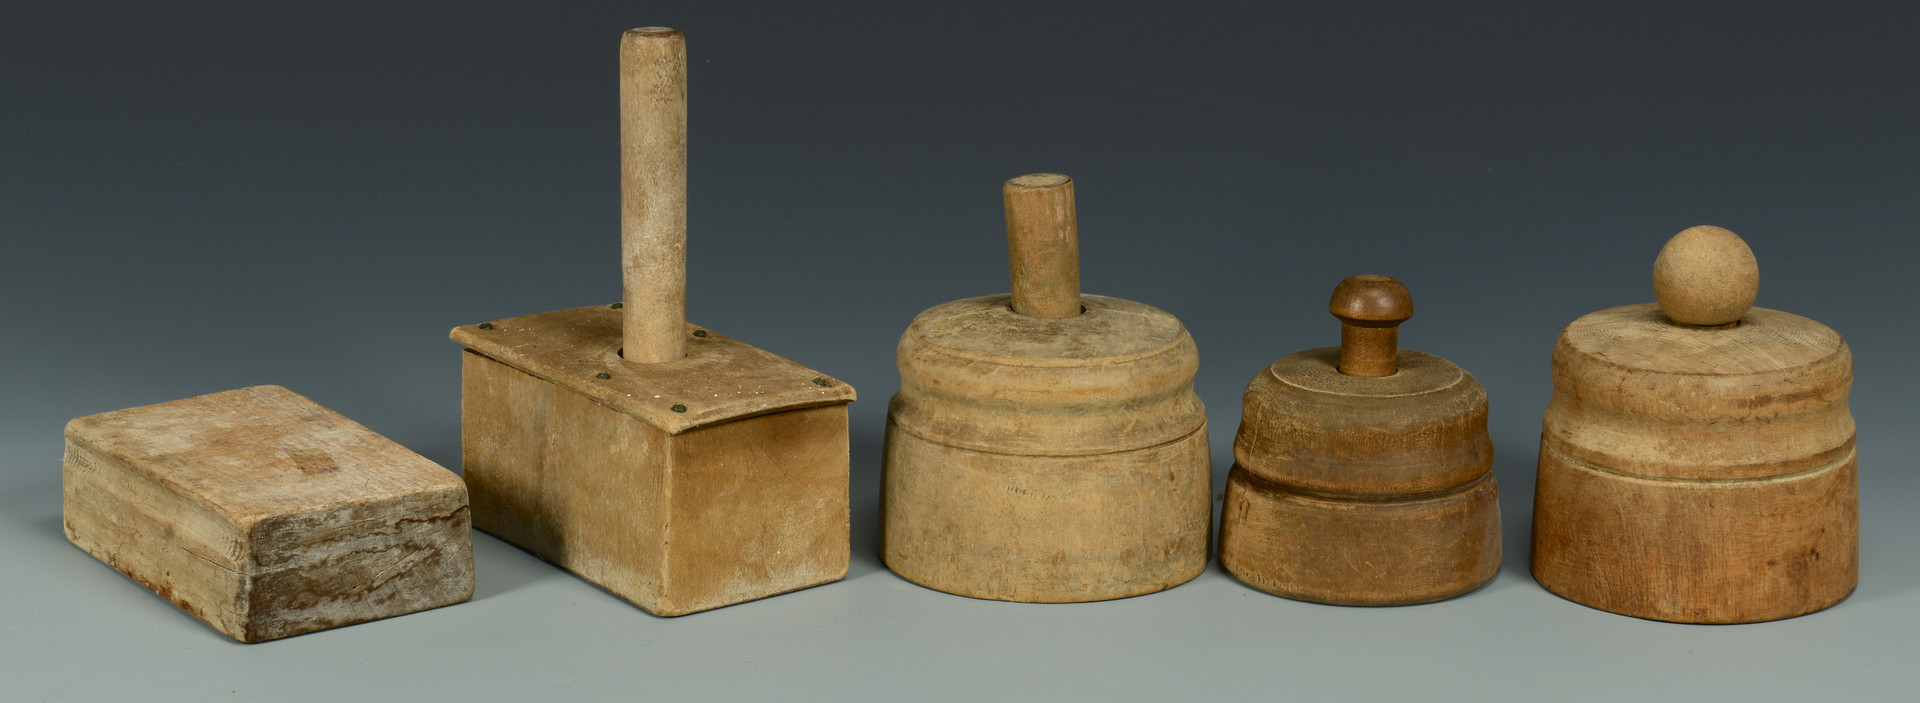 Lot 354: 19th C. Butter Molds and Flasks